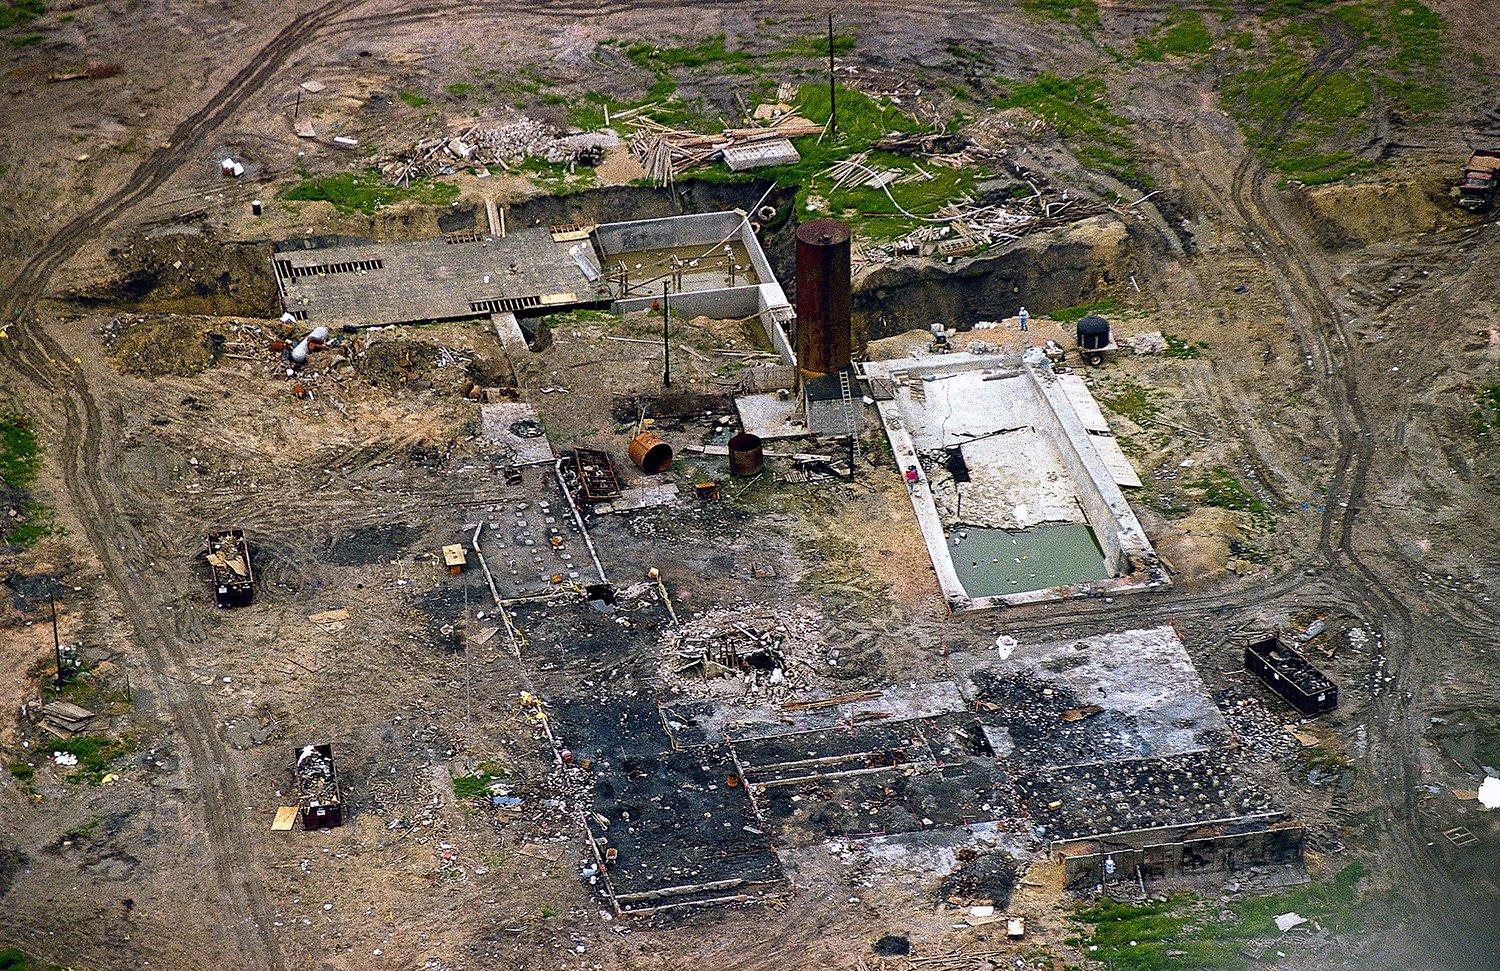  The charred remains of the Branch Davidian's 77-acre ranch are seen east of Waco, Texas, May 12, 1993. Doomsday cult leader David Koresh's apocalyptic vision came true when the fire believed set by his followers destroyed their prairie compound as f